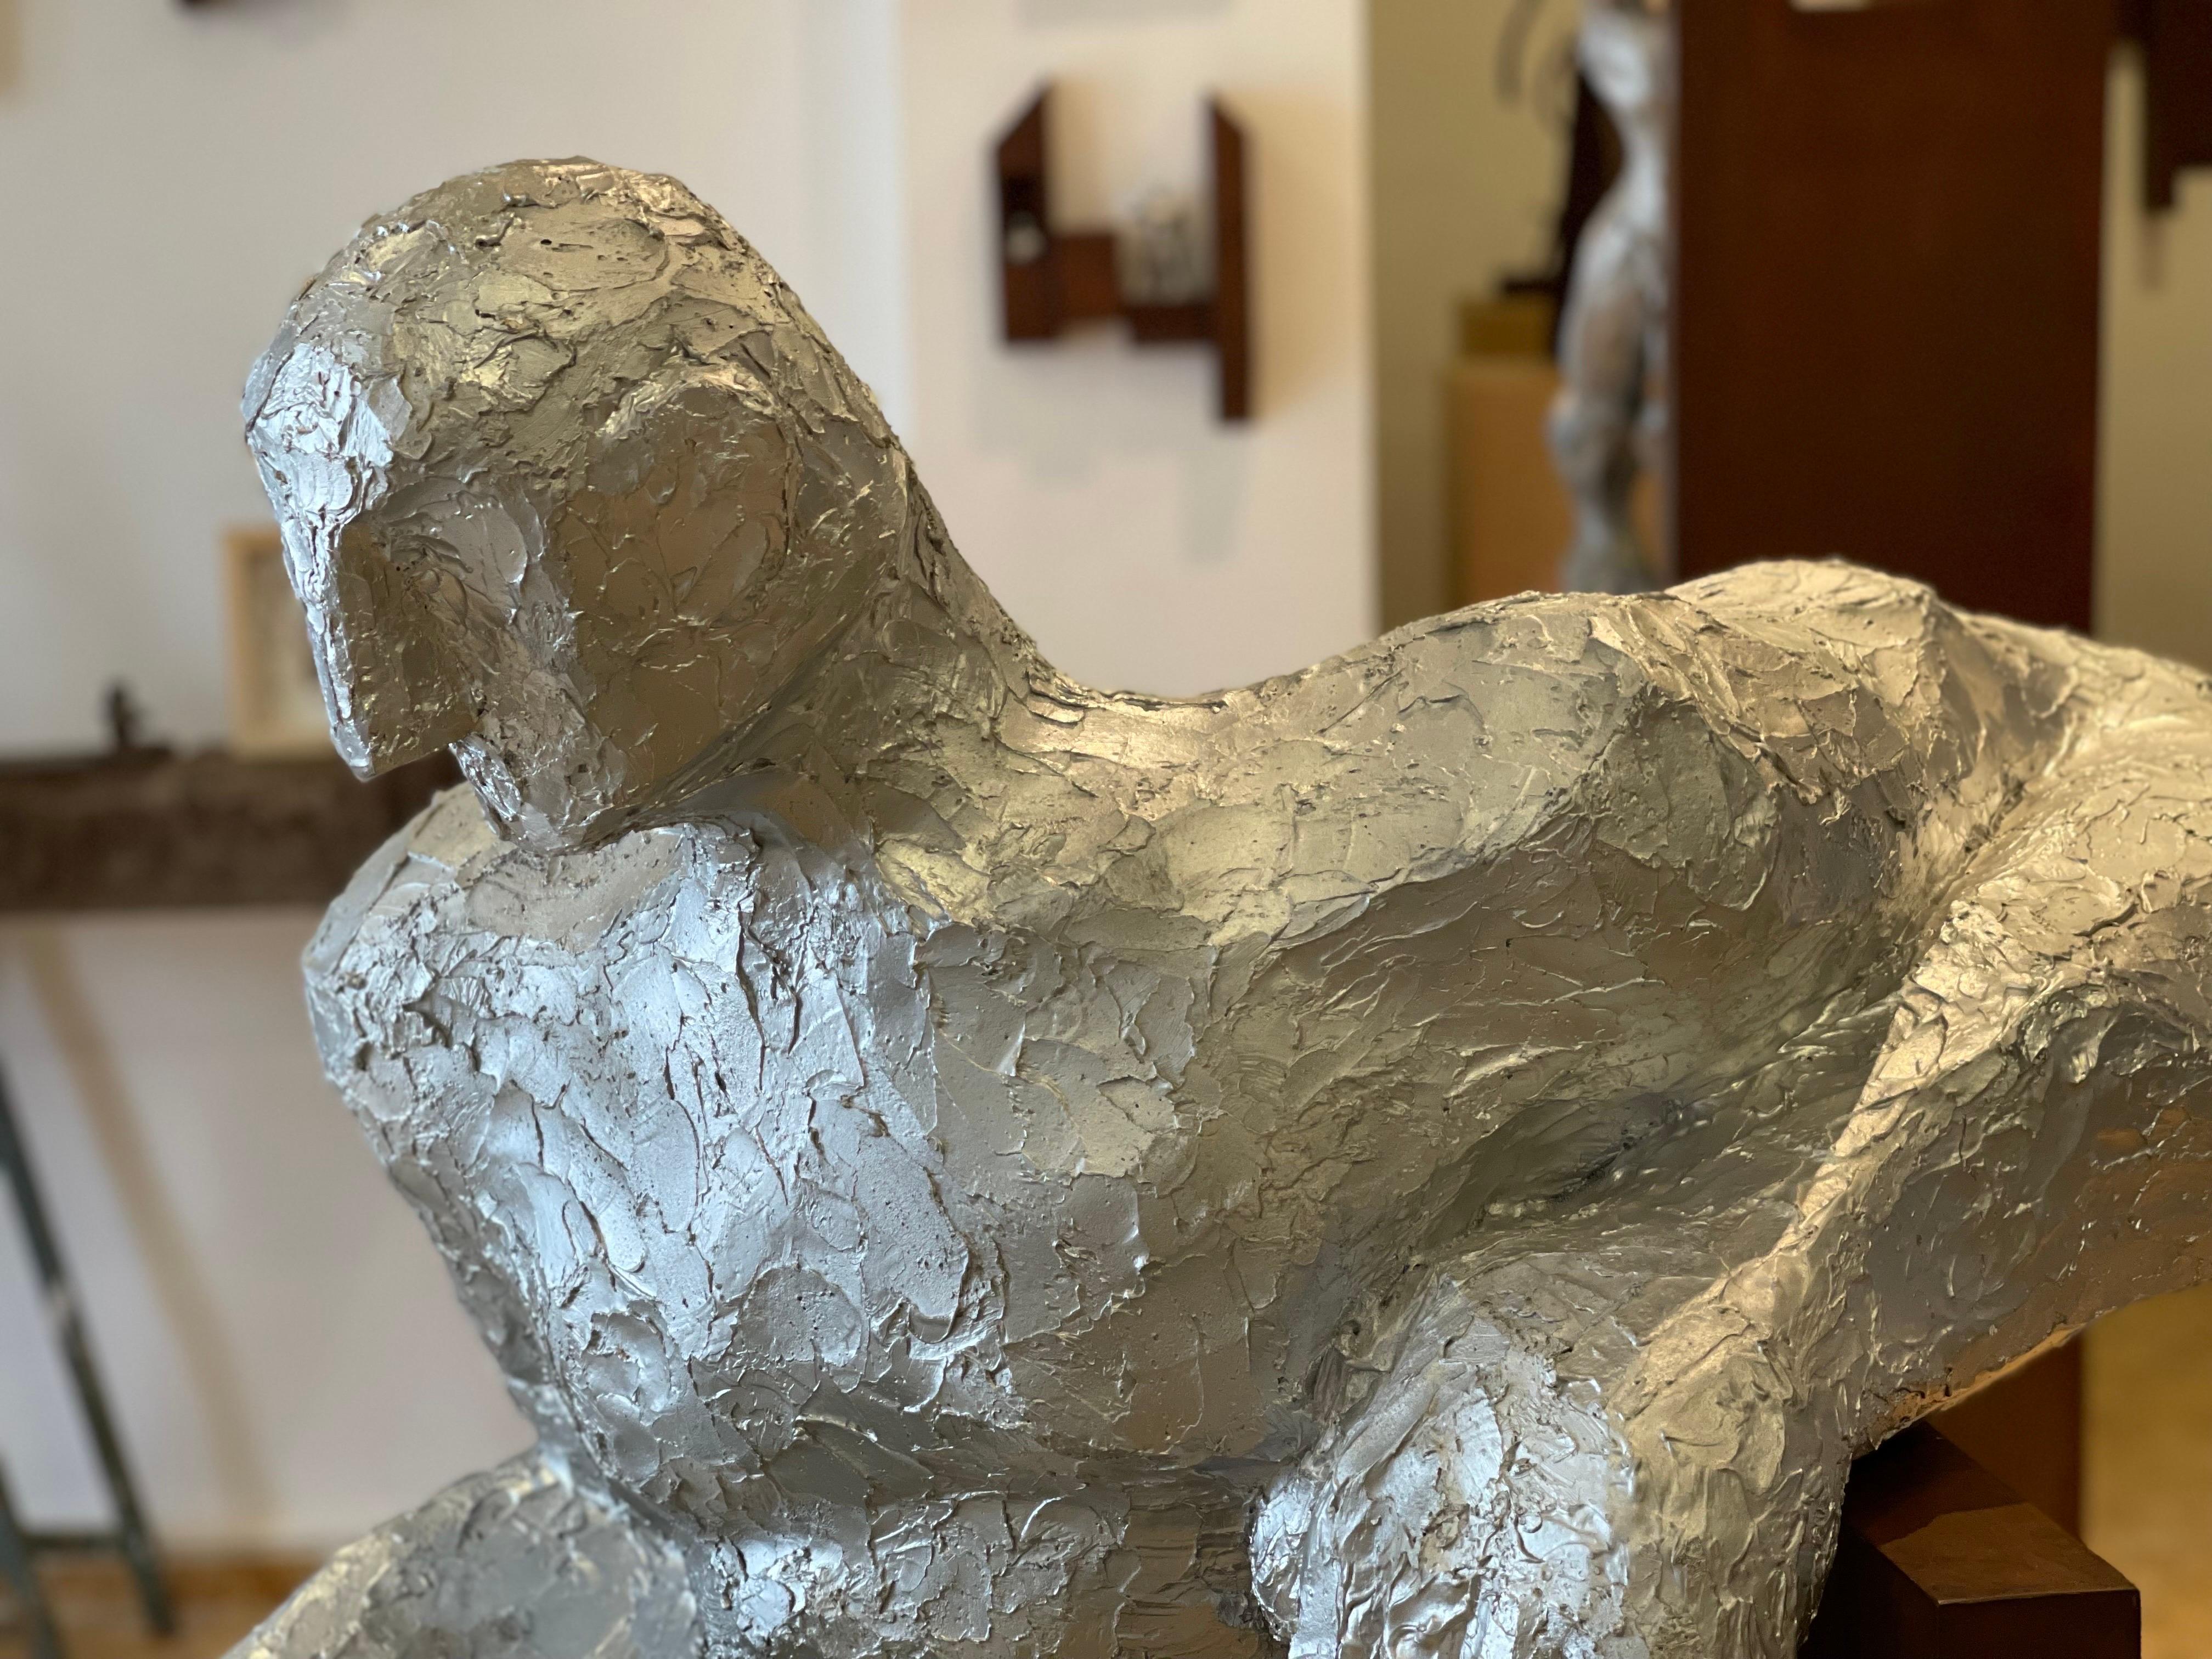 Assegut 

Here some fragments for one of his latest exhibition catalogue 
“I think that a work of art should puzzle viewers, make them reflect on the meaning of life” Antoni Tàpies

Moisés Gil’s sculptures can be described as philosophical and